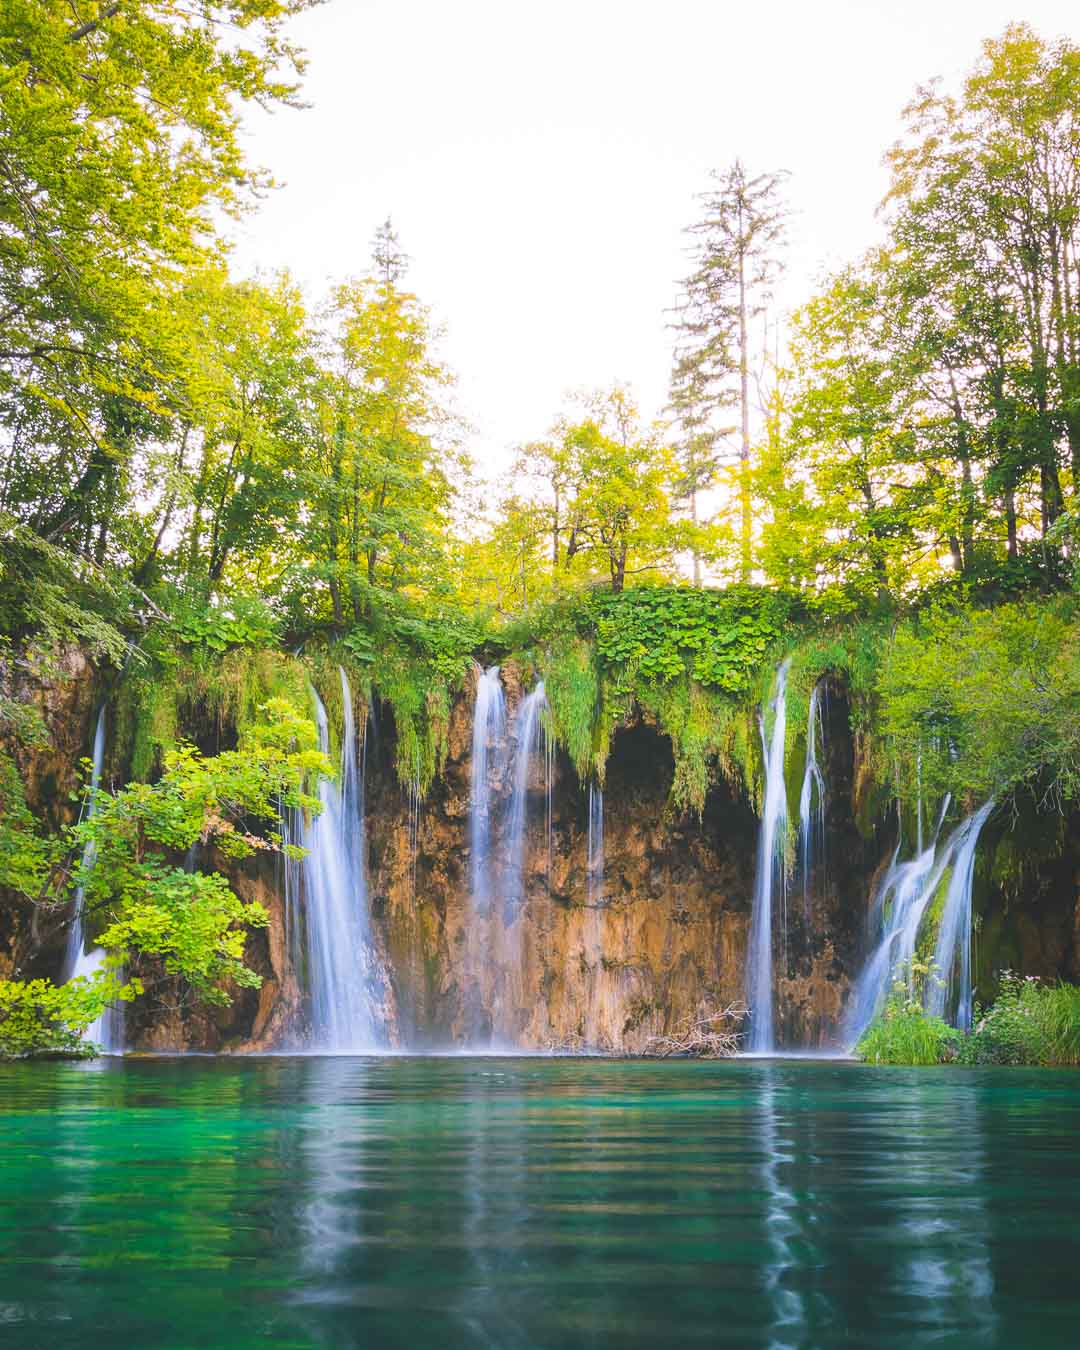 quintuple waterfall over a lake in plitvice